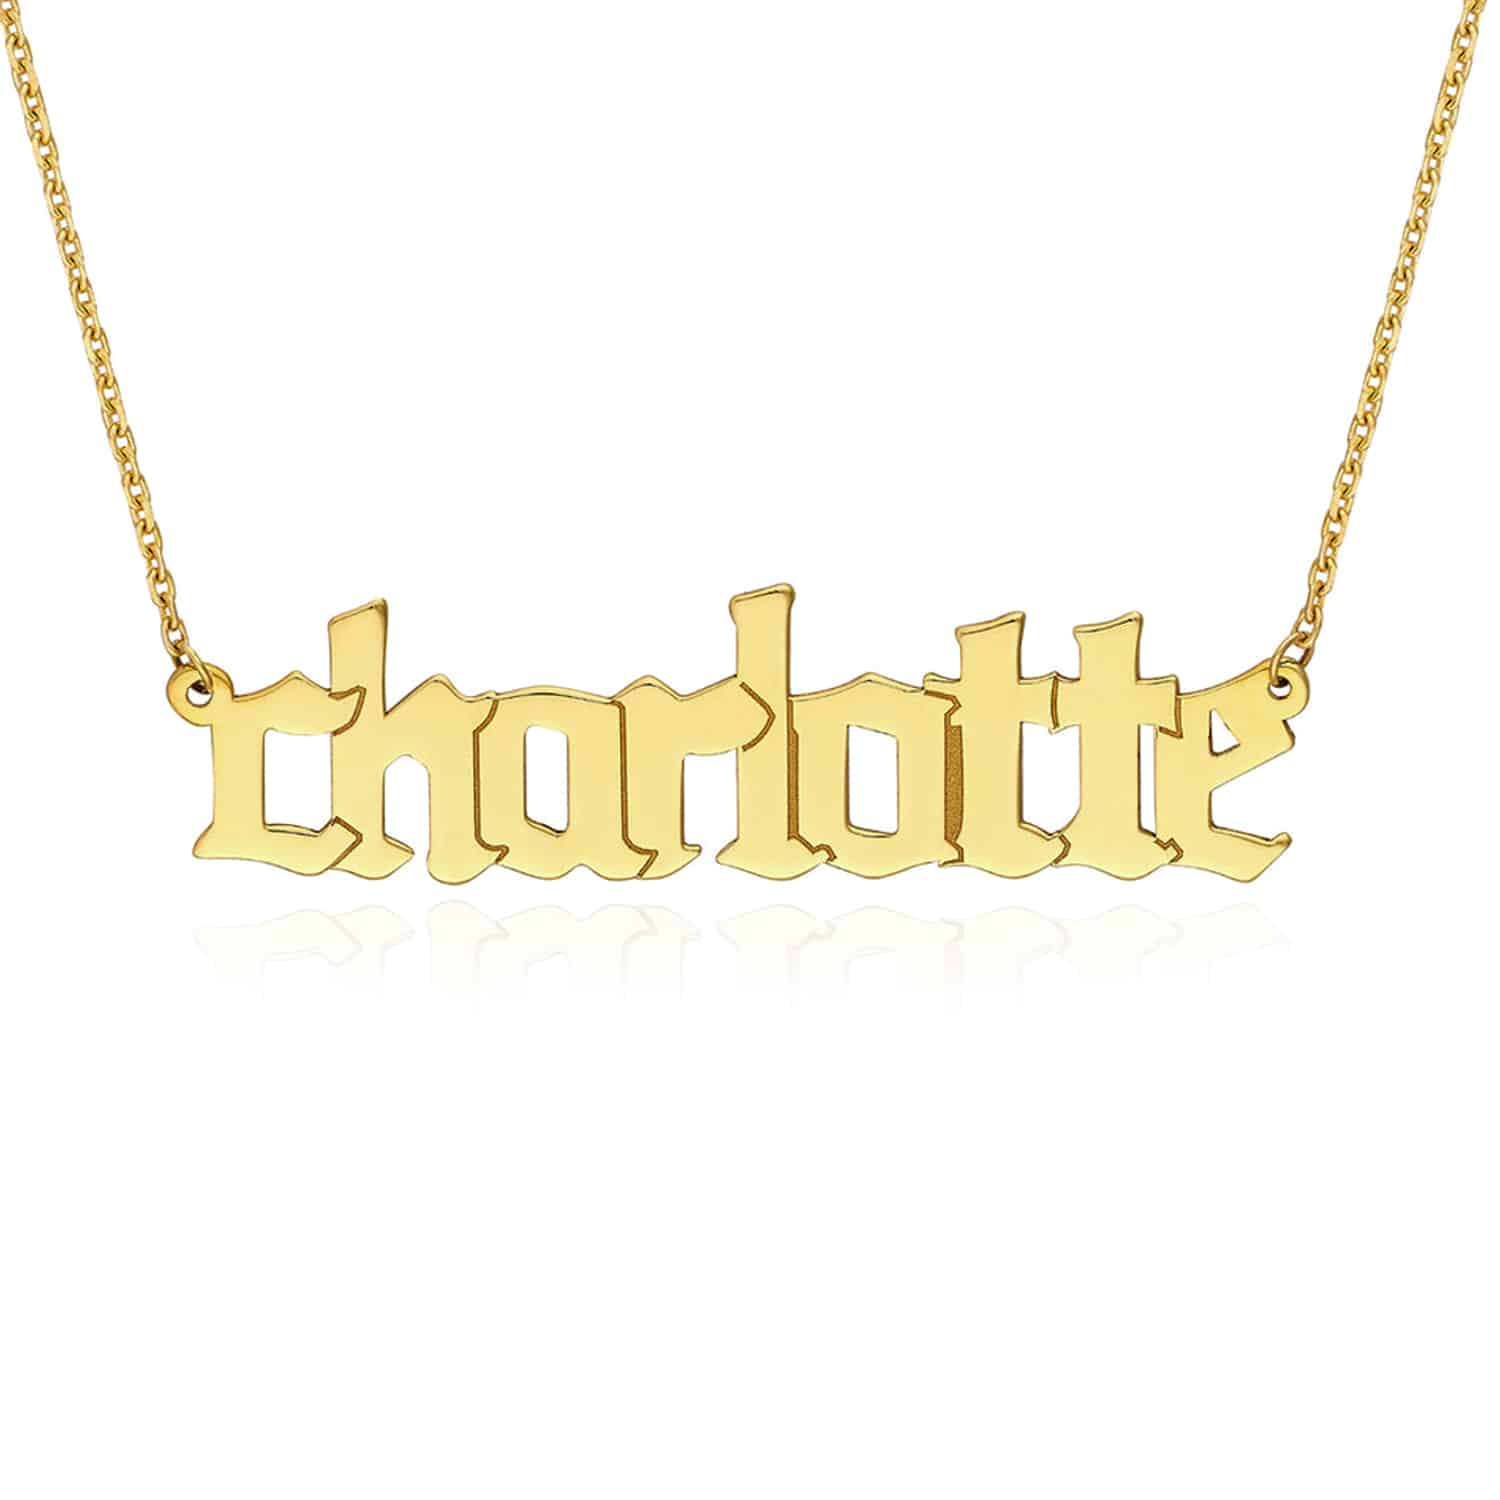 Customizable 14K Gold Yellow White Rose Gothic Nameplate Pendant Necklace 14-18" - Yellow Gold, 14"-16" Adjustable